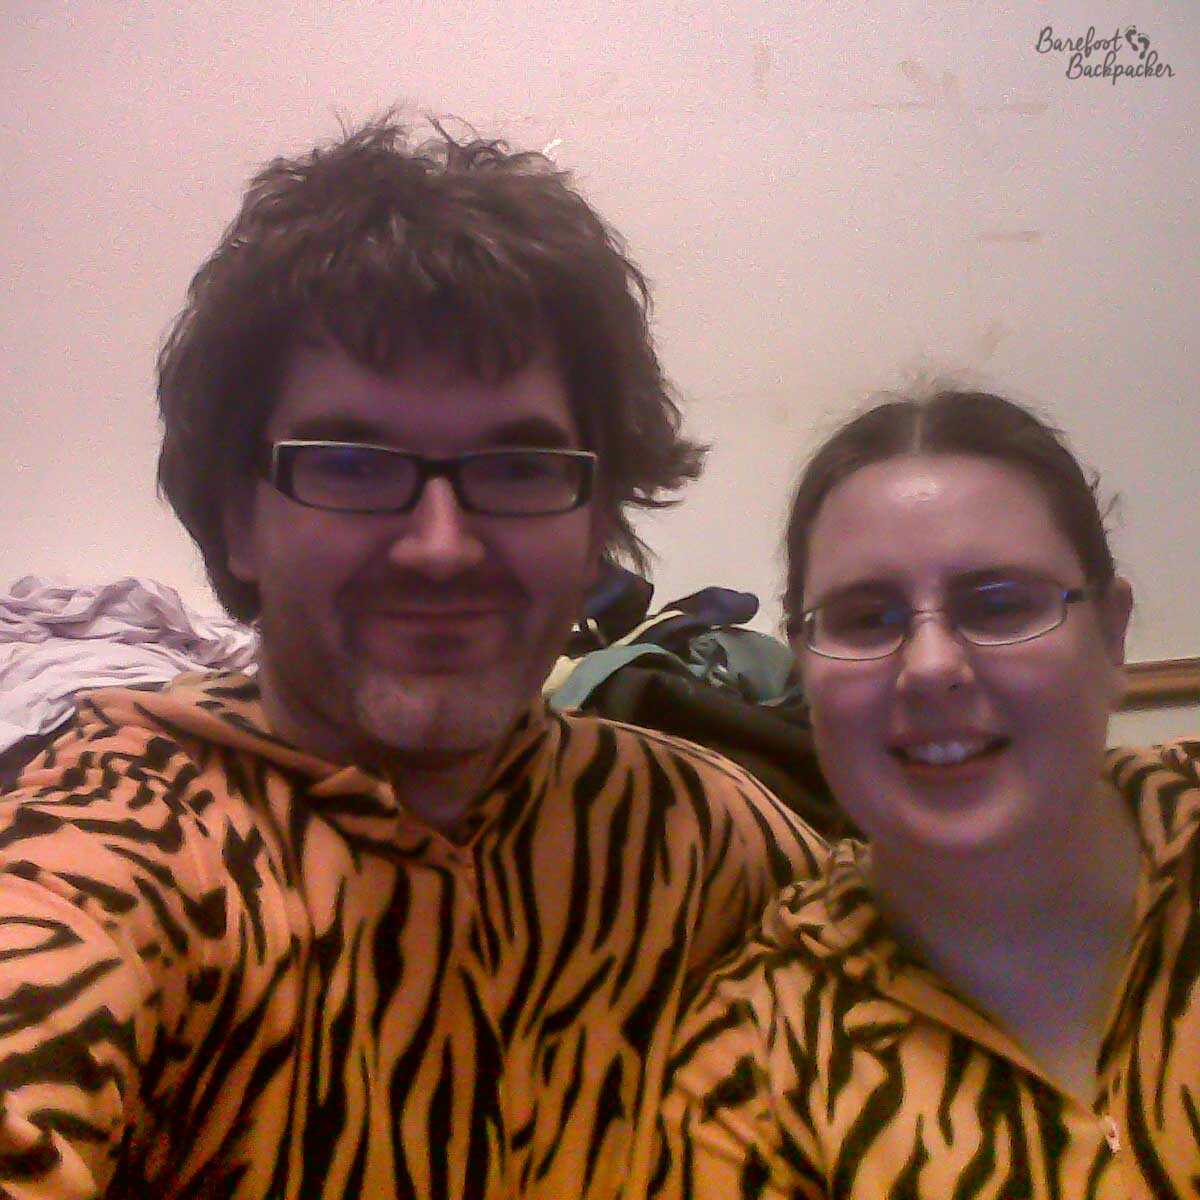 Two people are sitting in front of the camera, in a slightly dark room, wearing matching tiger-striped onesies. One is male, the other female.